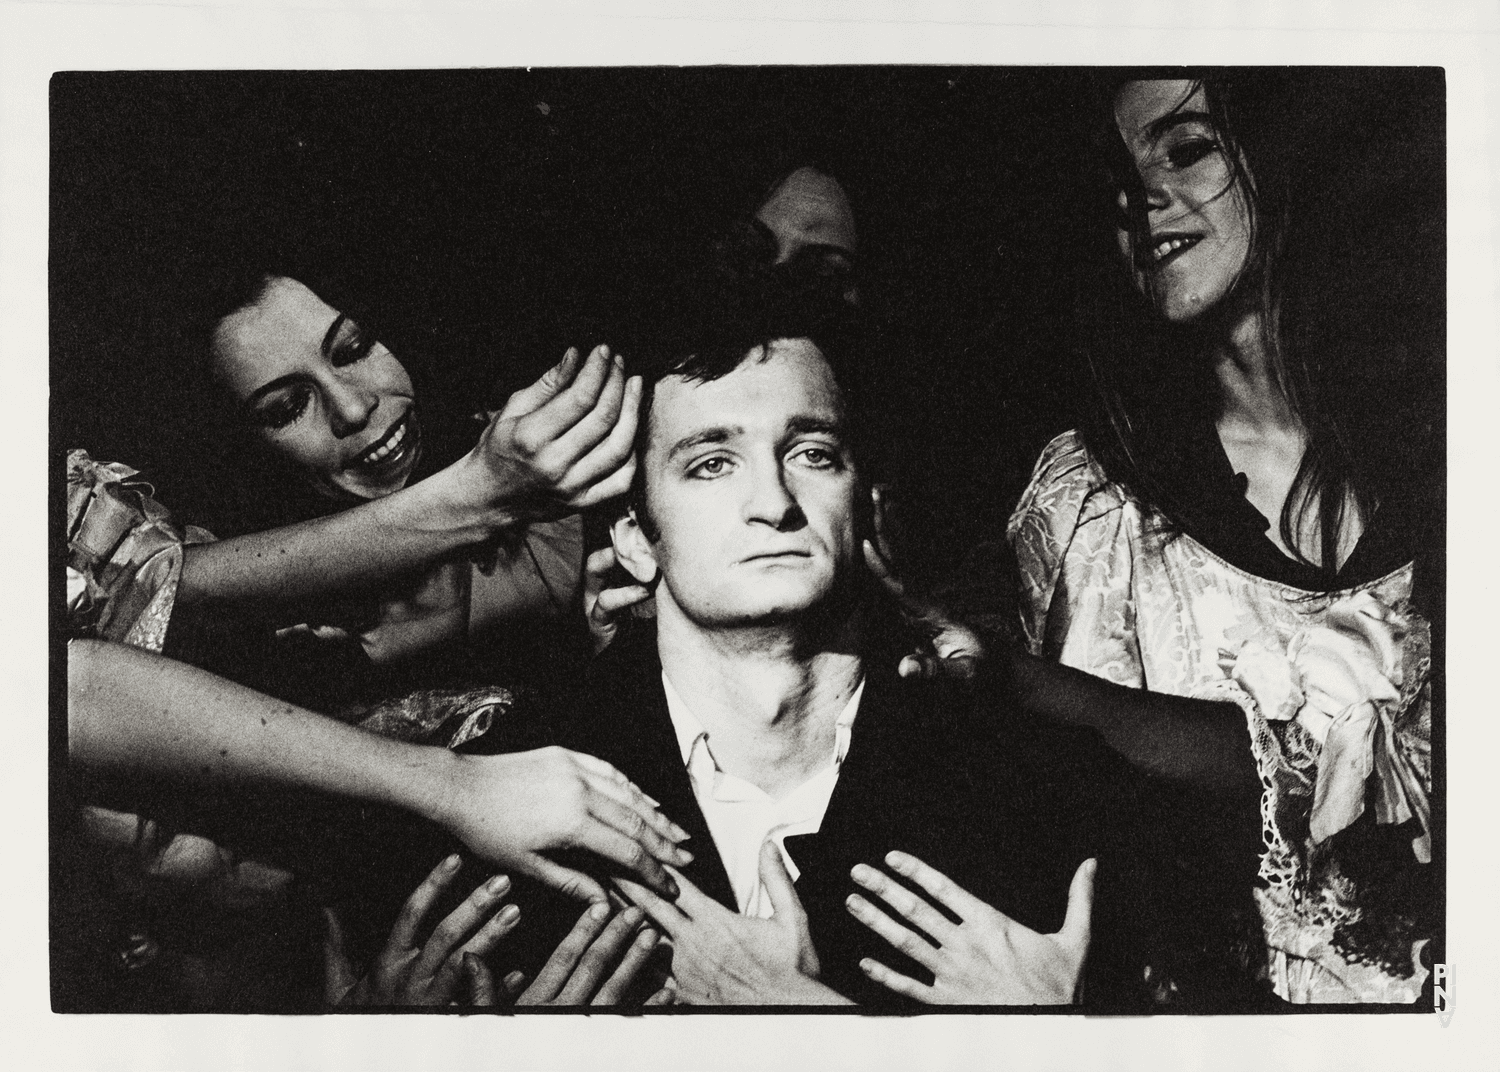 Marion Cito, Jan Minařík and Barbara Passow-Diekamp in “Bluebeard. While Listening to a Tape Recording of Béla Bartók's Opera "Duke Bluebeard's Castle"” by Pina Bausch